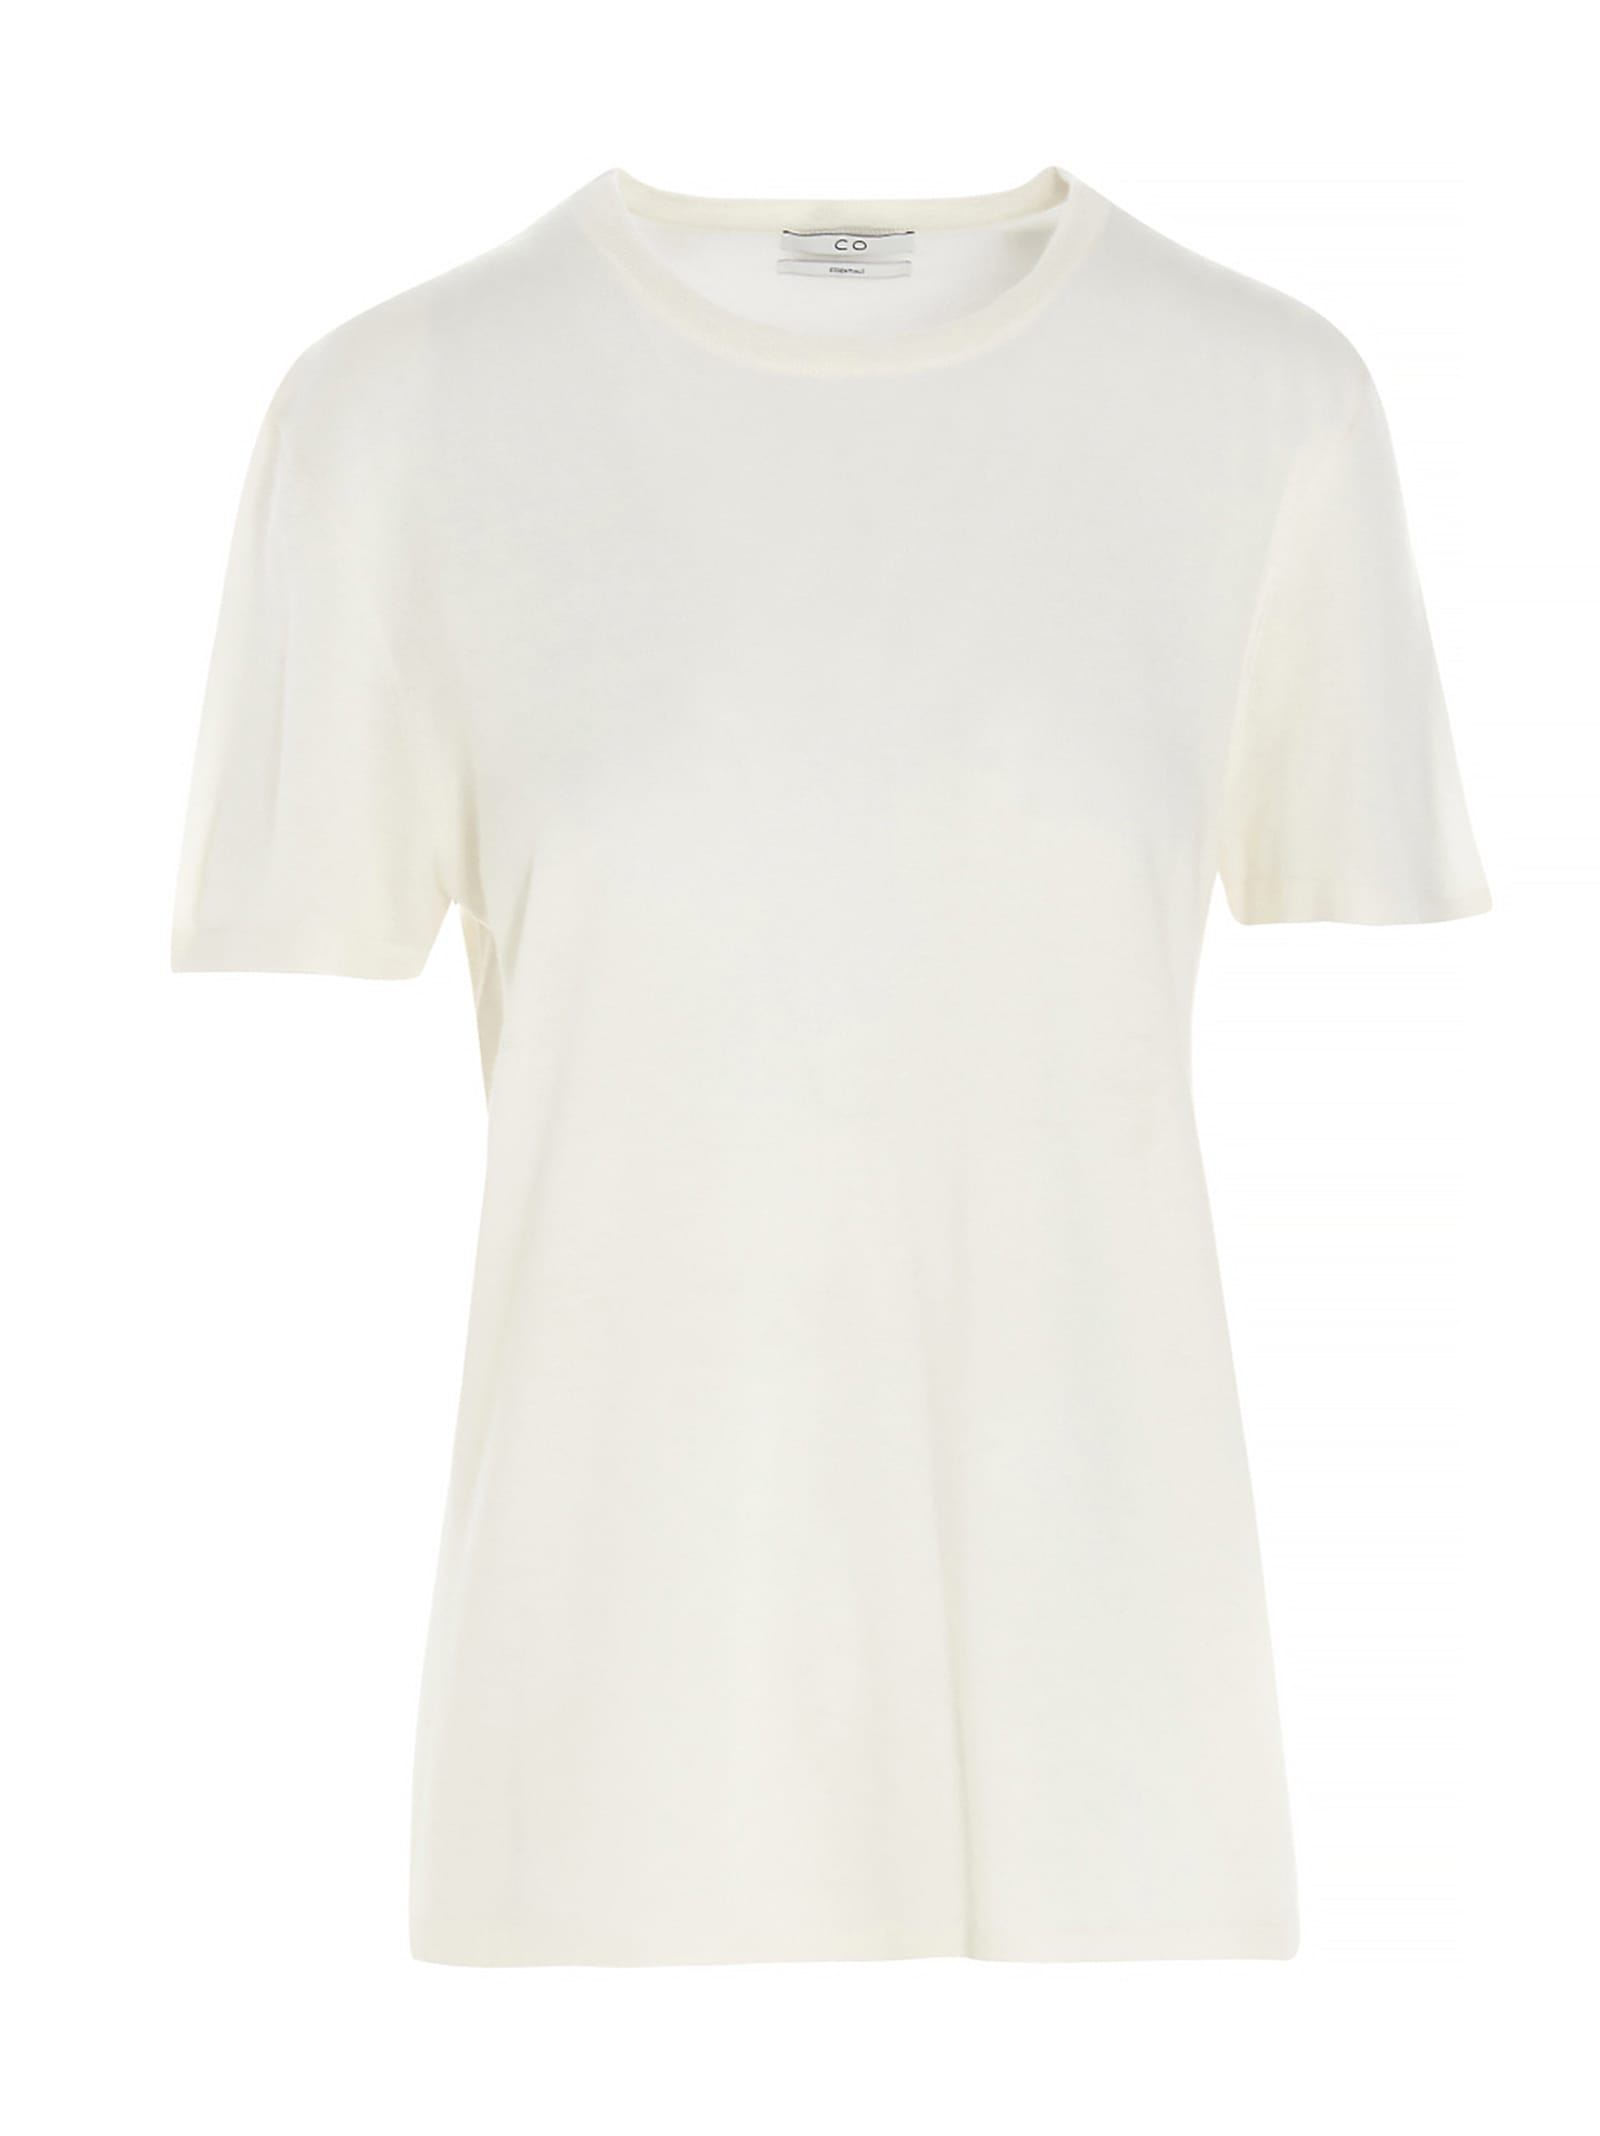 CO CO T-SHIRT,7359BCMESSN IVORY